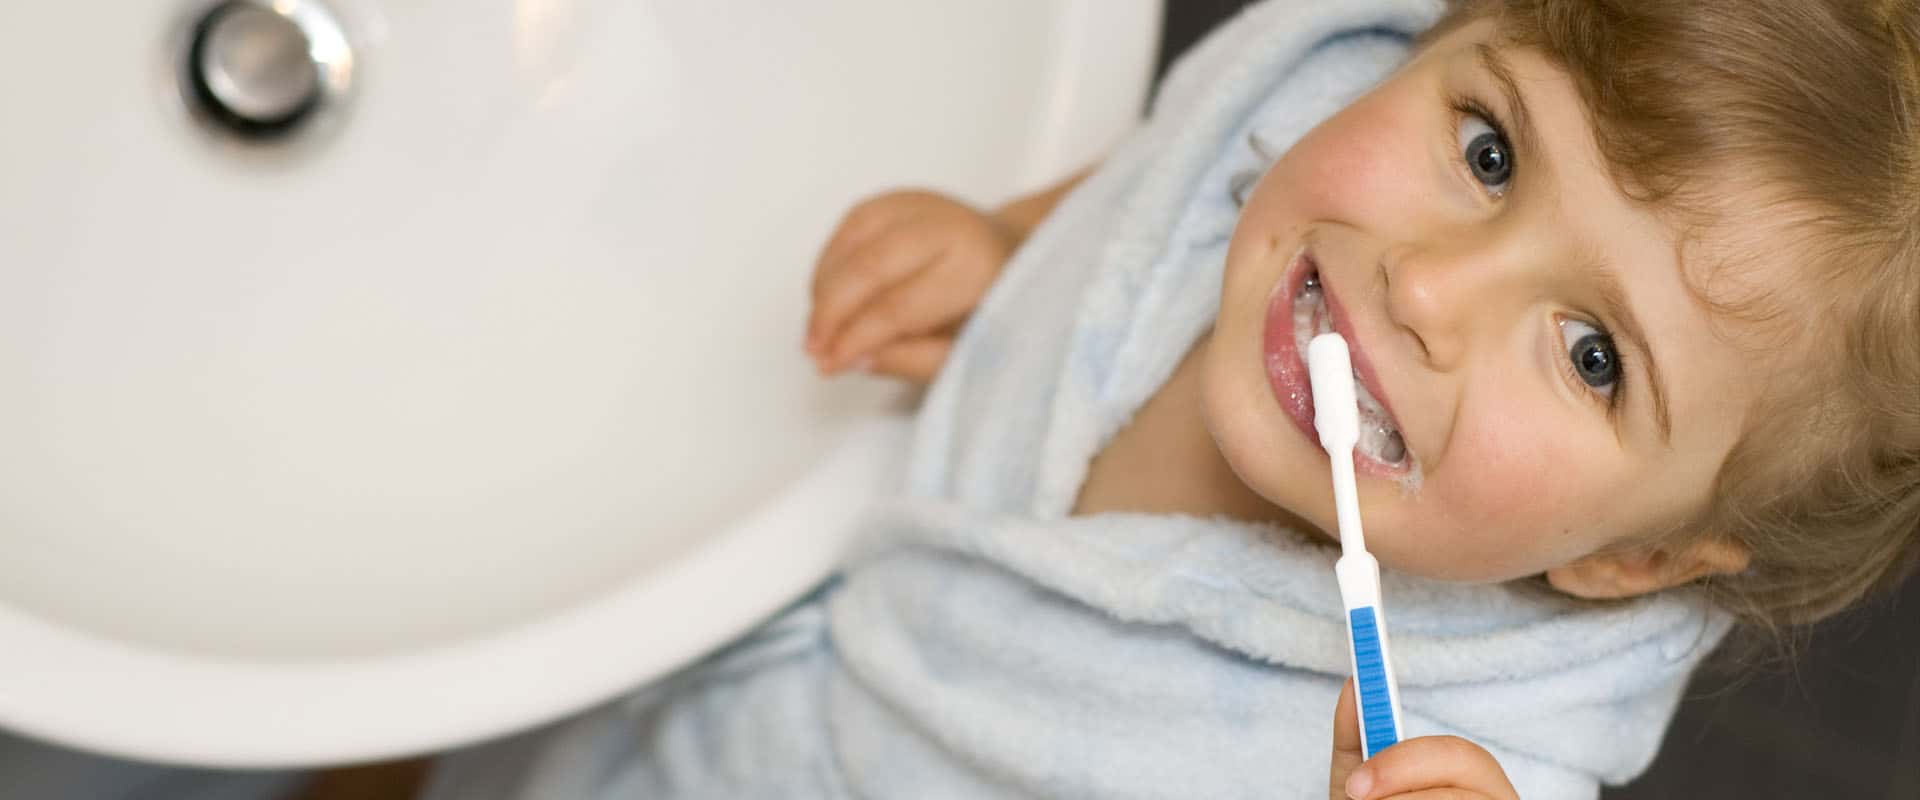 Encouraging Good Oral Health for Your Children